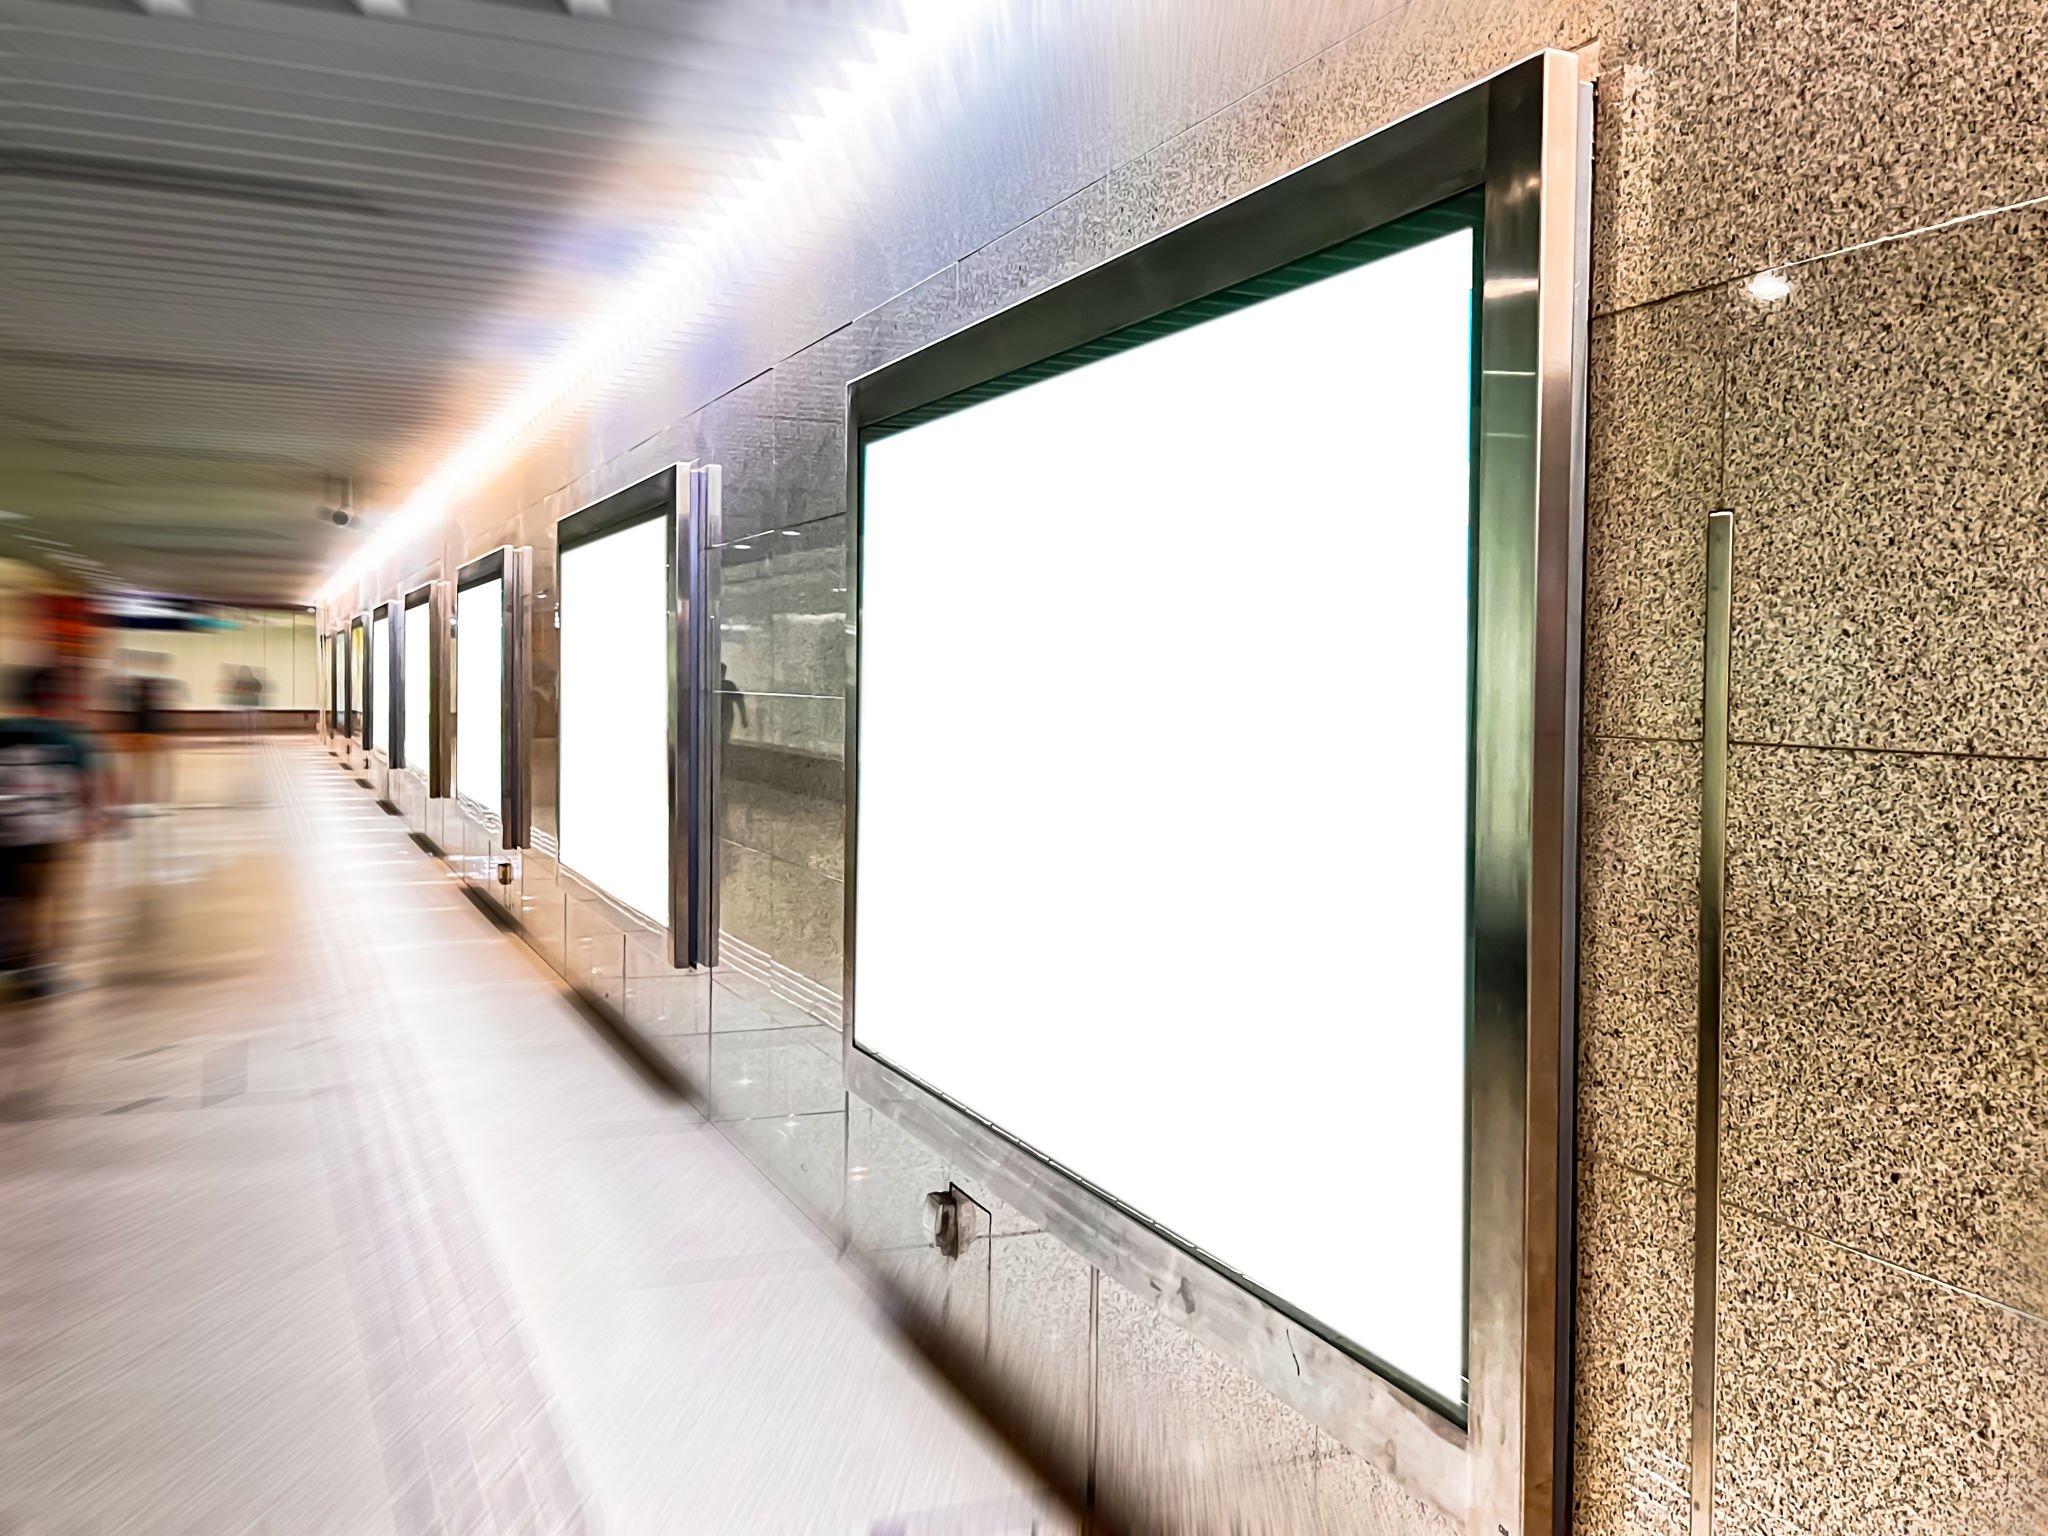 Digital Signage: The New Way to Make Your Business Shine